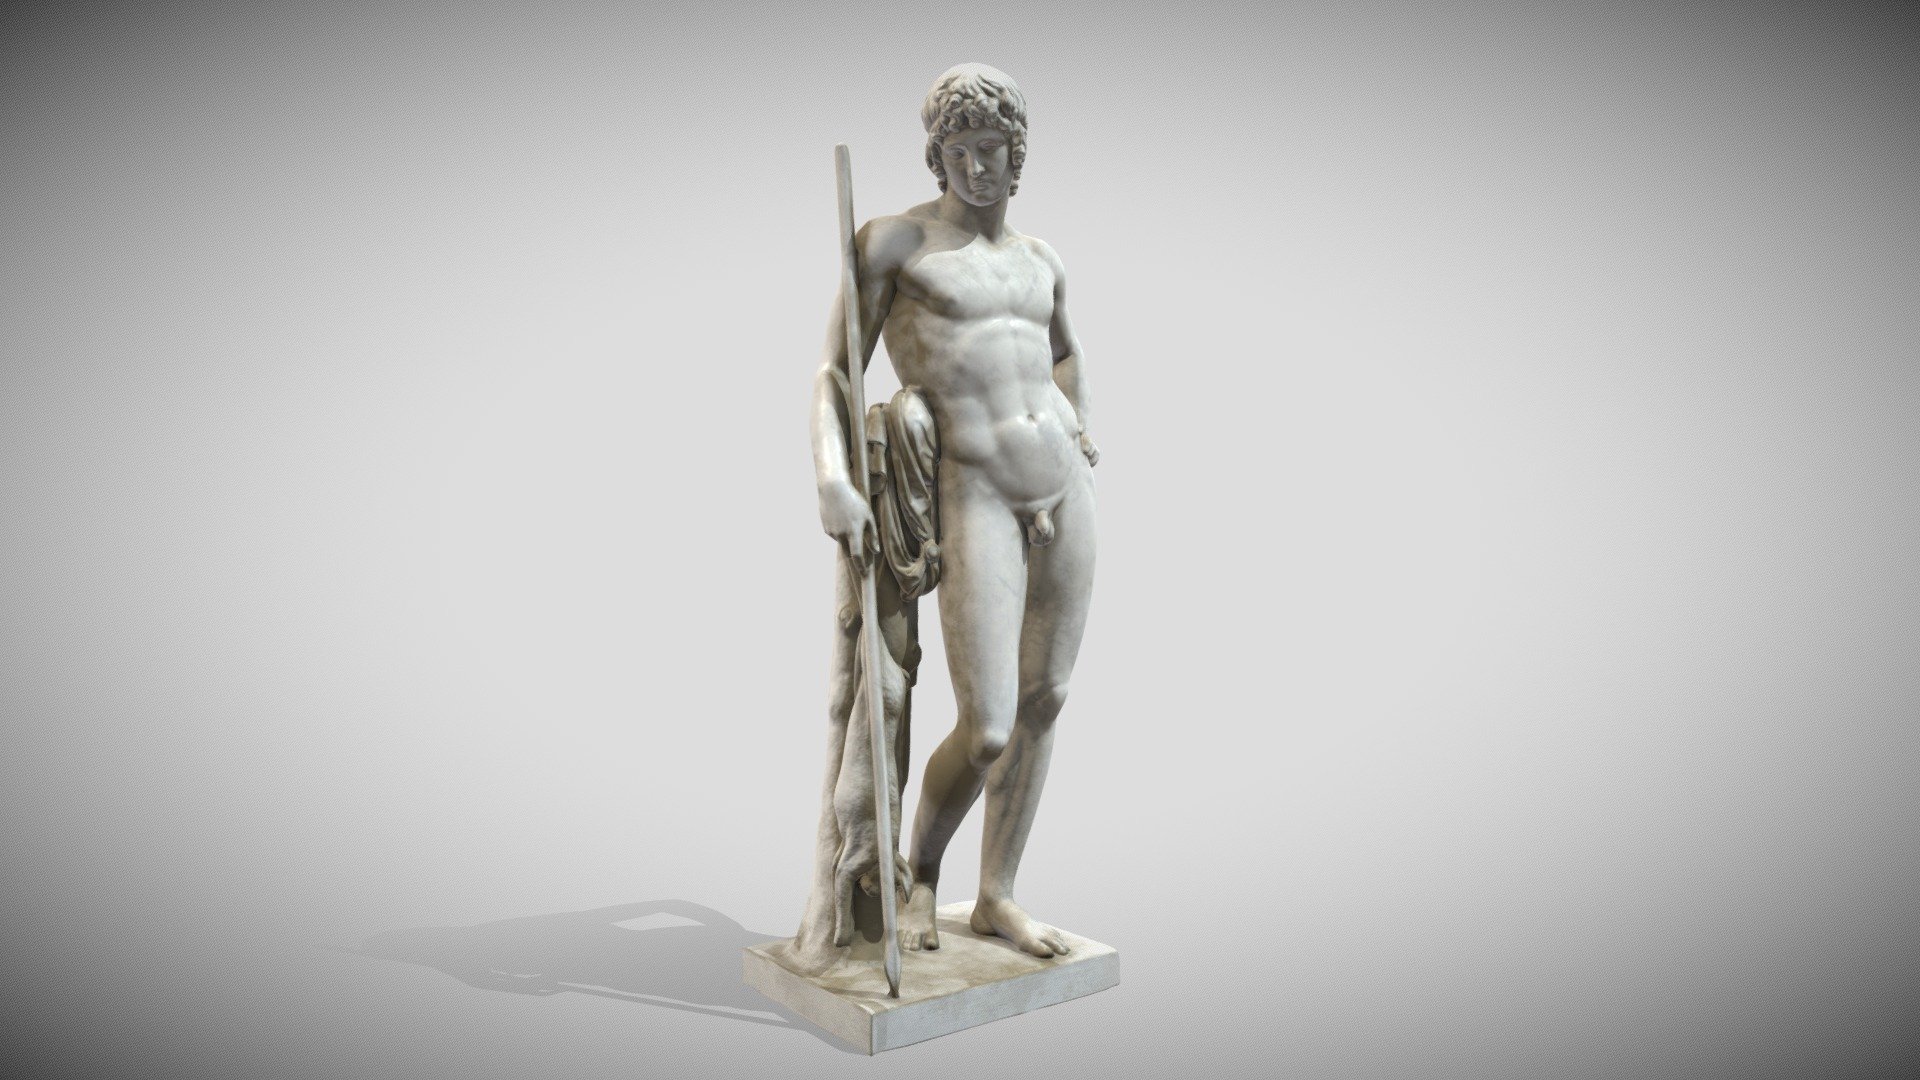 Original very nice 3D Scan from the Thorvaldsens Museum

https://www.myminifactory.com/object/3d-print-adonis-107765

here the Painted Gaming Version LR... 3d model